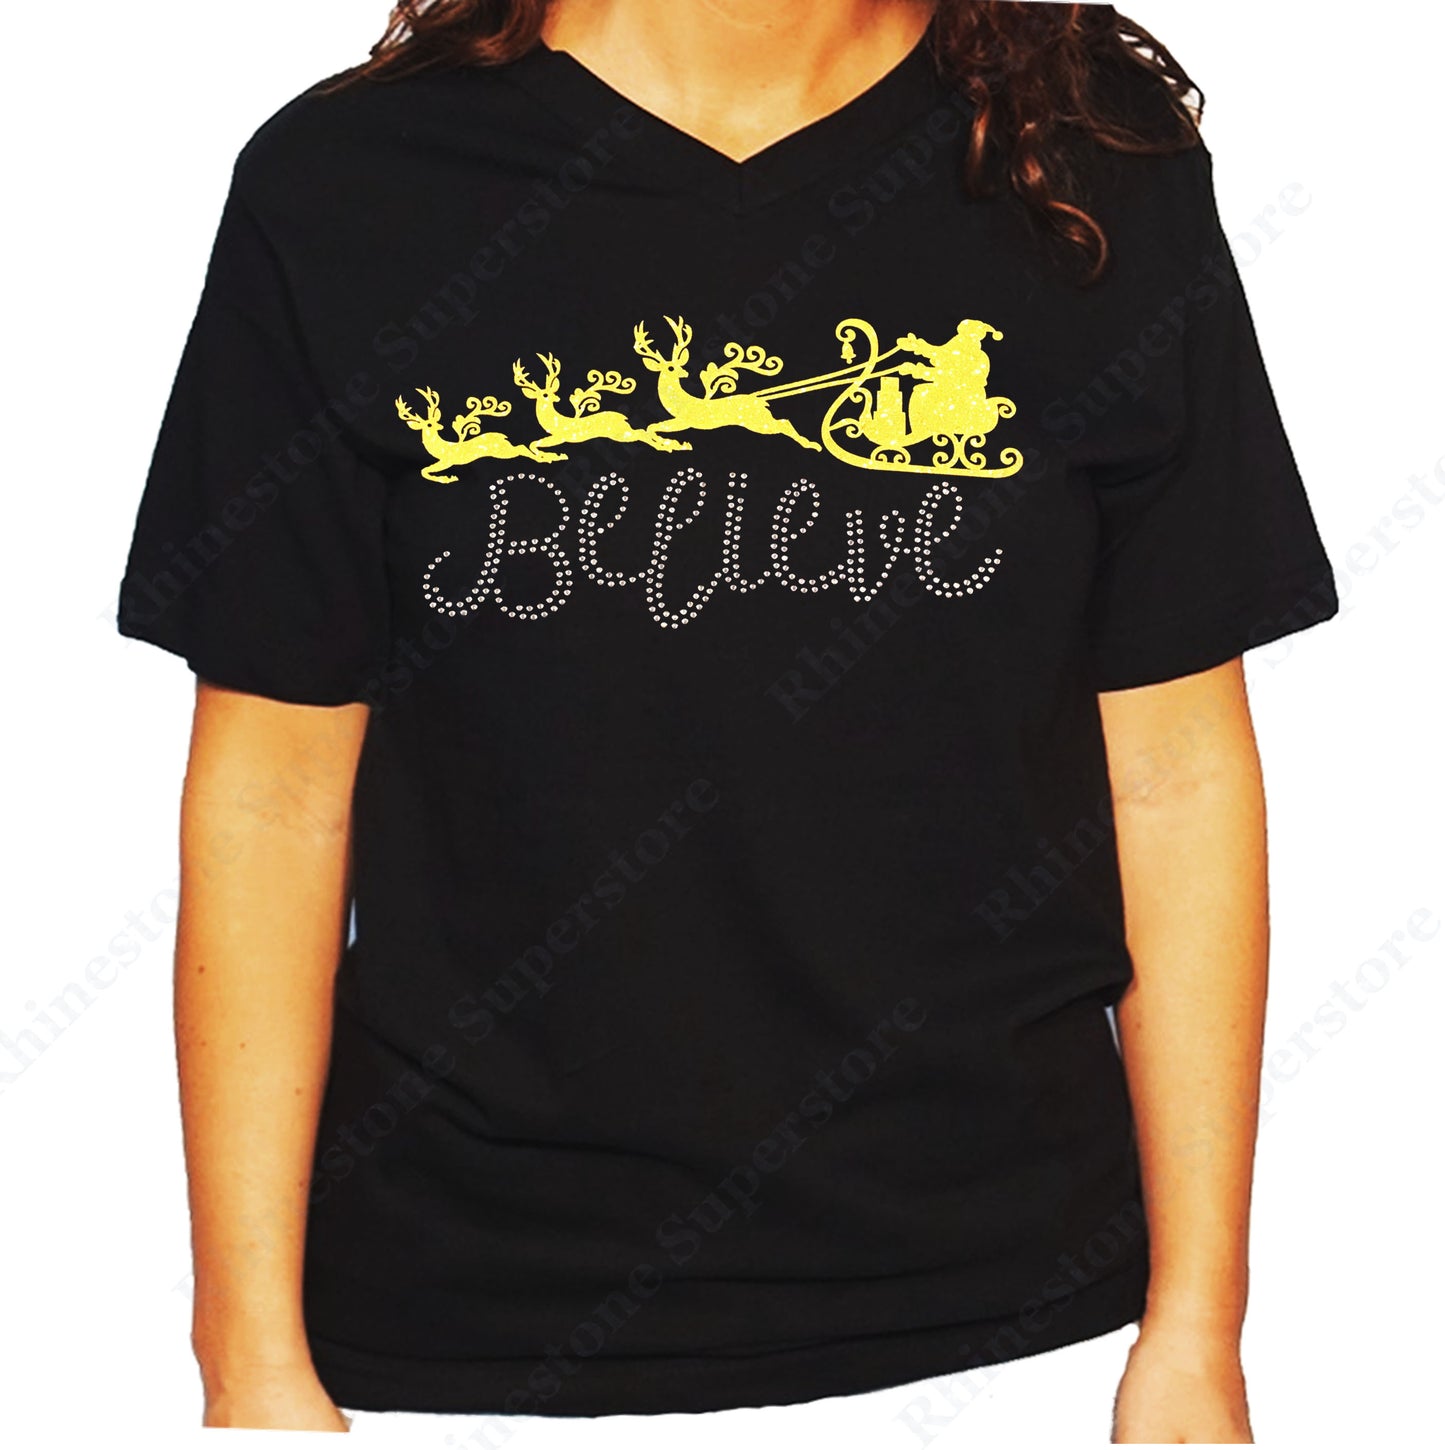 Women's / Unisex T-Shirt with Believe with Santa Sleigh in Glitters and Rhinestones